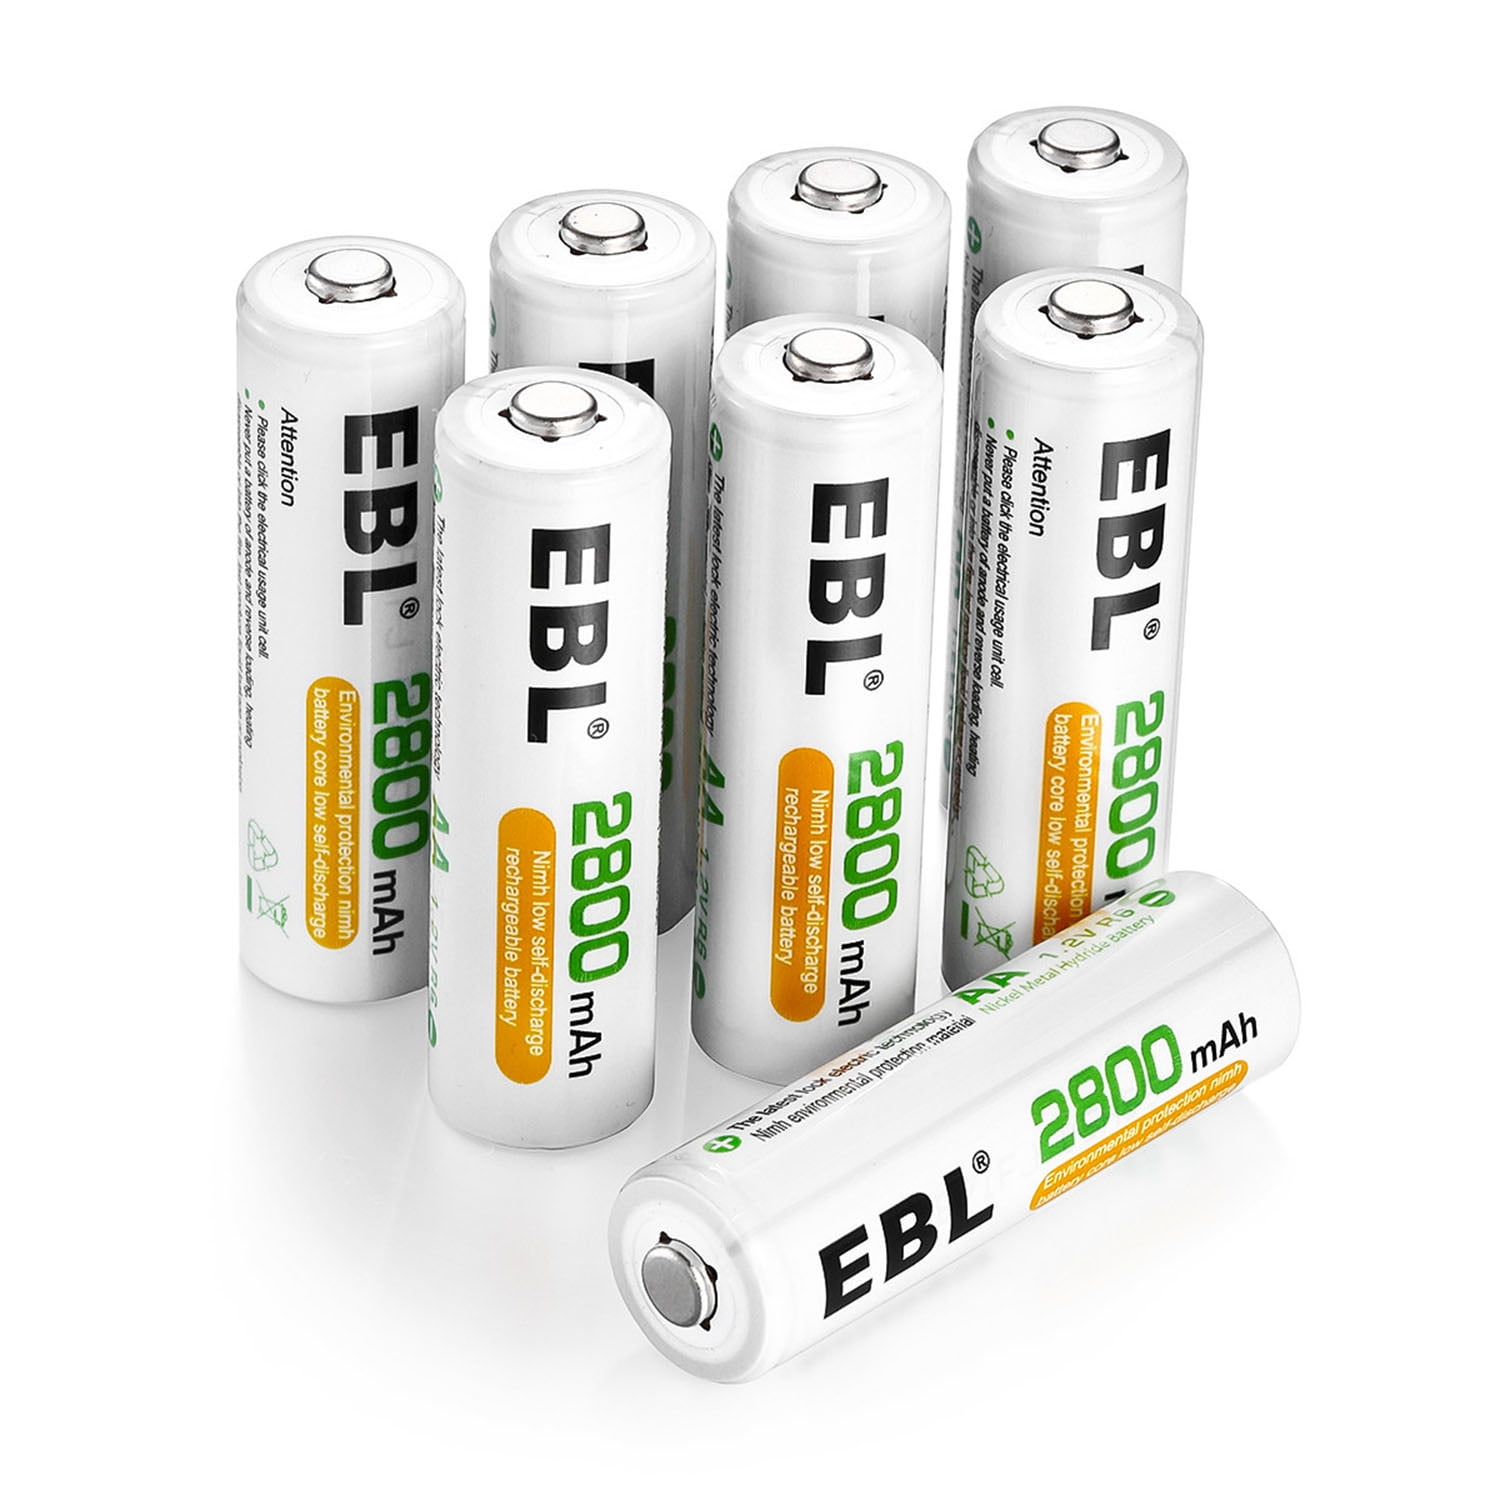 RayHom AA Rechargeable Battery 1.2 V 2800mAh Ni-MH AA Pre-Charged Batteries 20 Pack